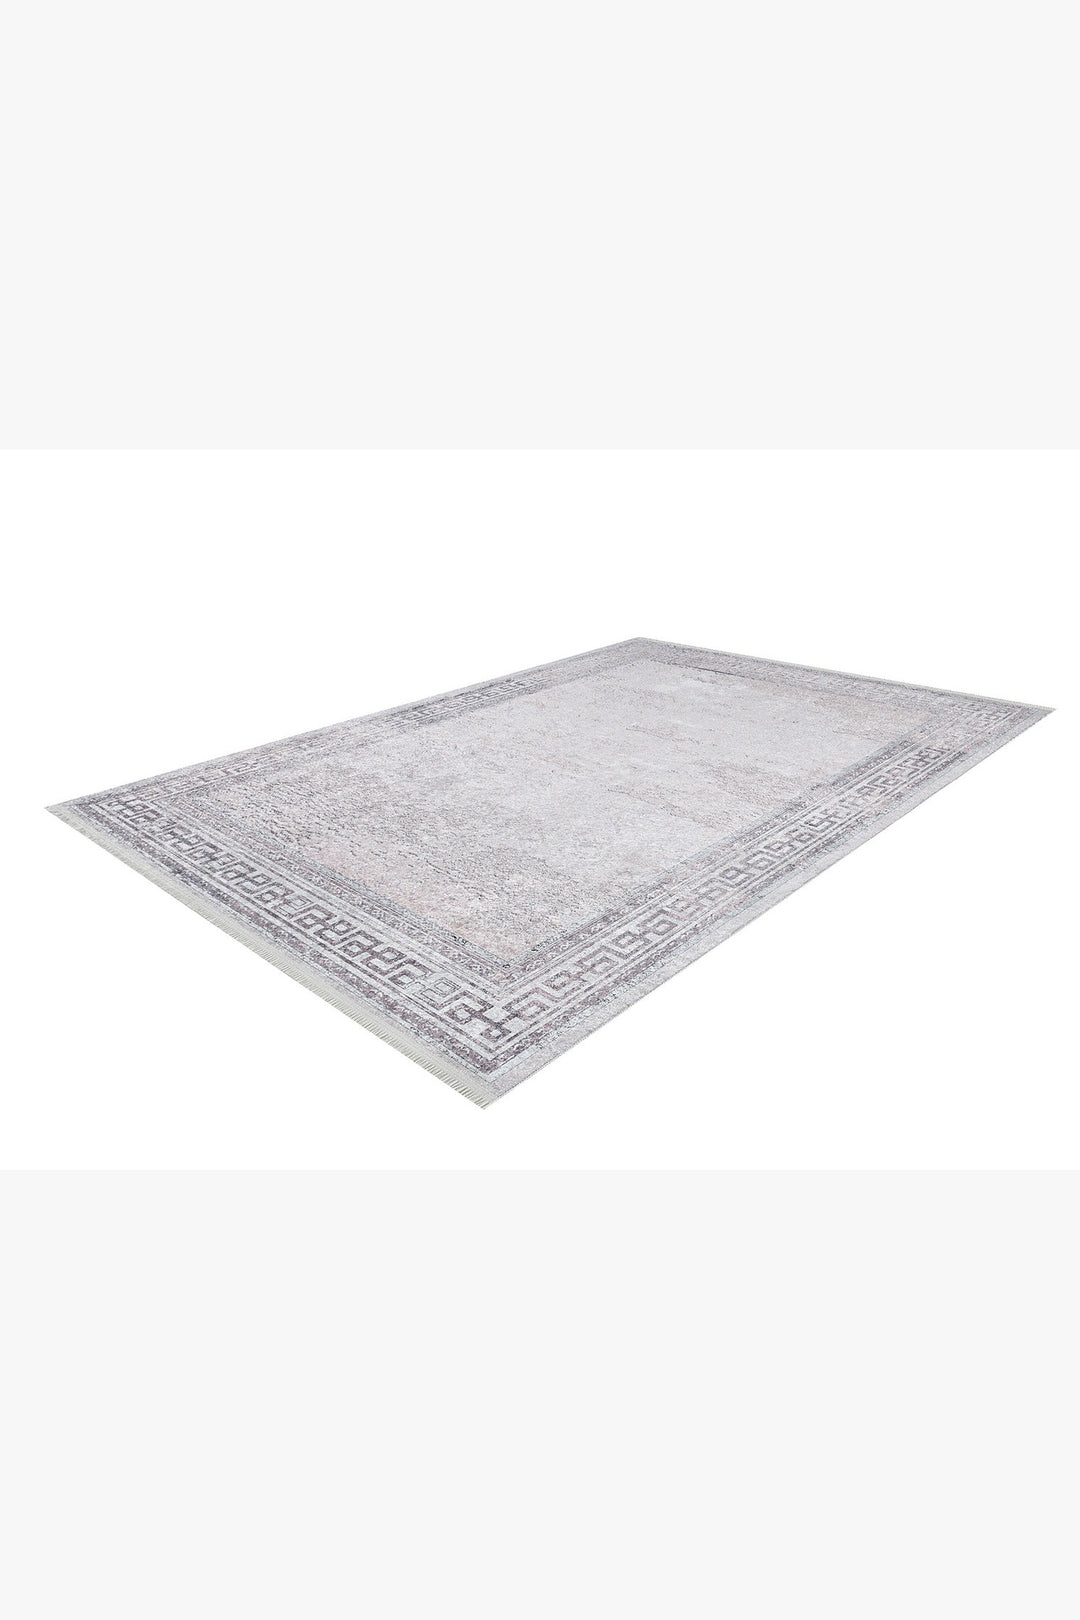 machine-washable-area-rug-Bordered-Modern-Collection-Gray-Anthracite-JR1764